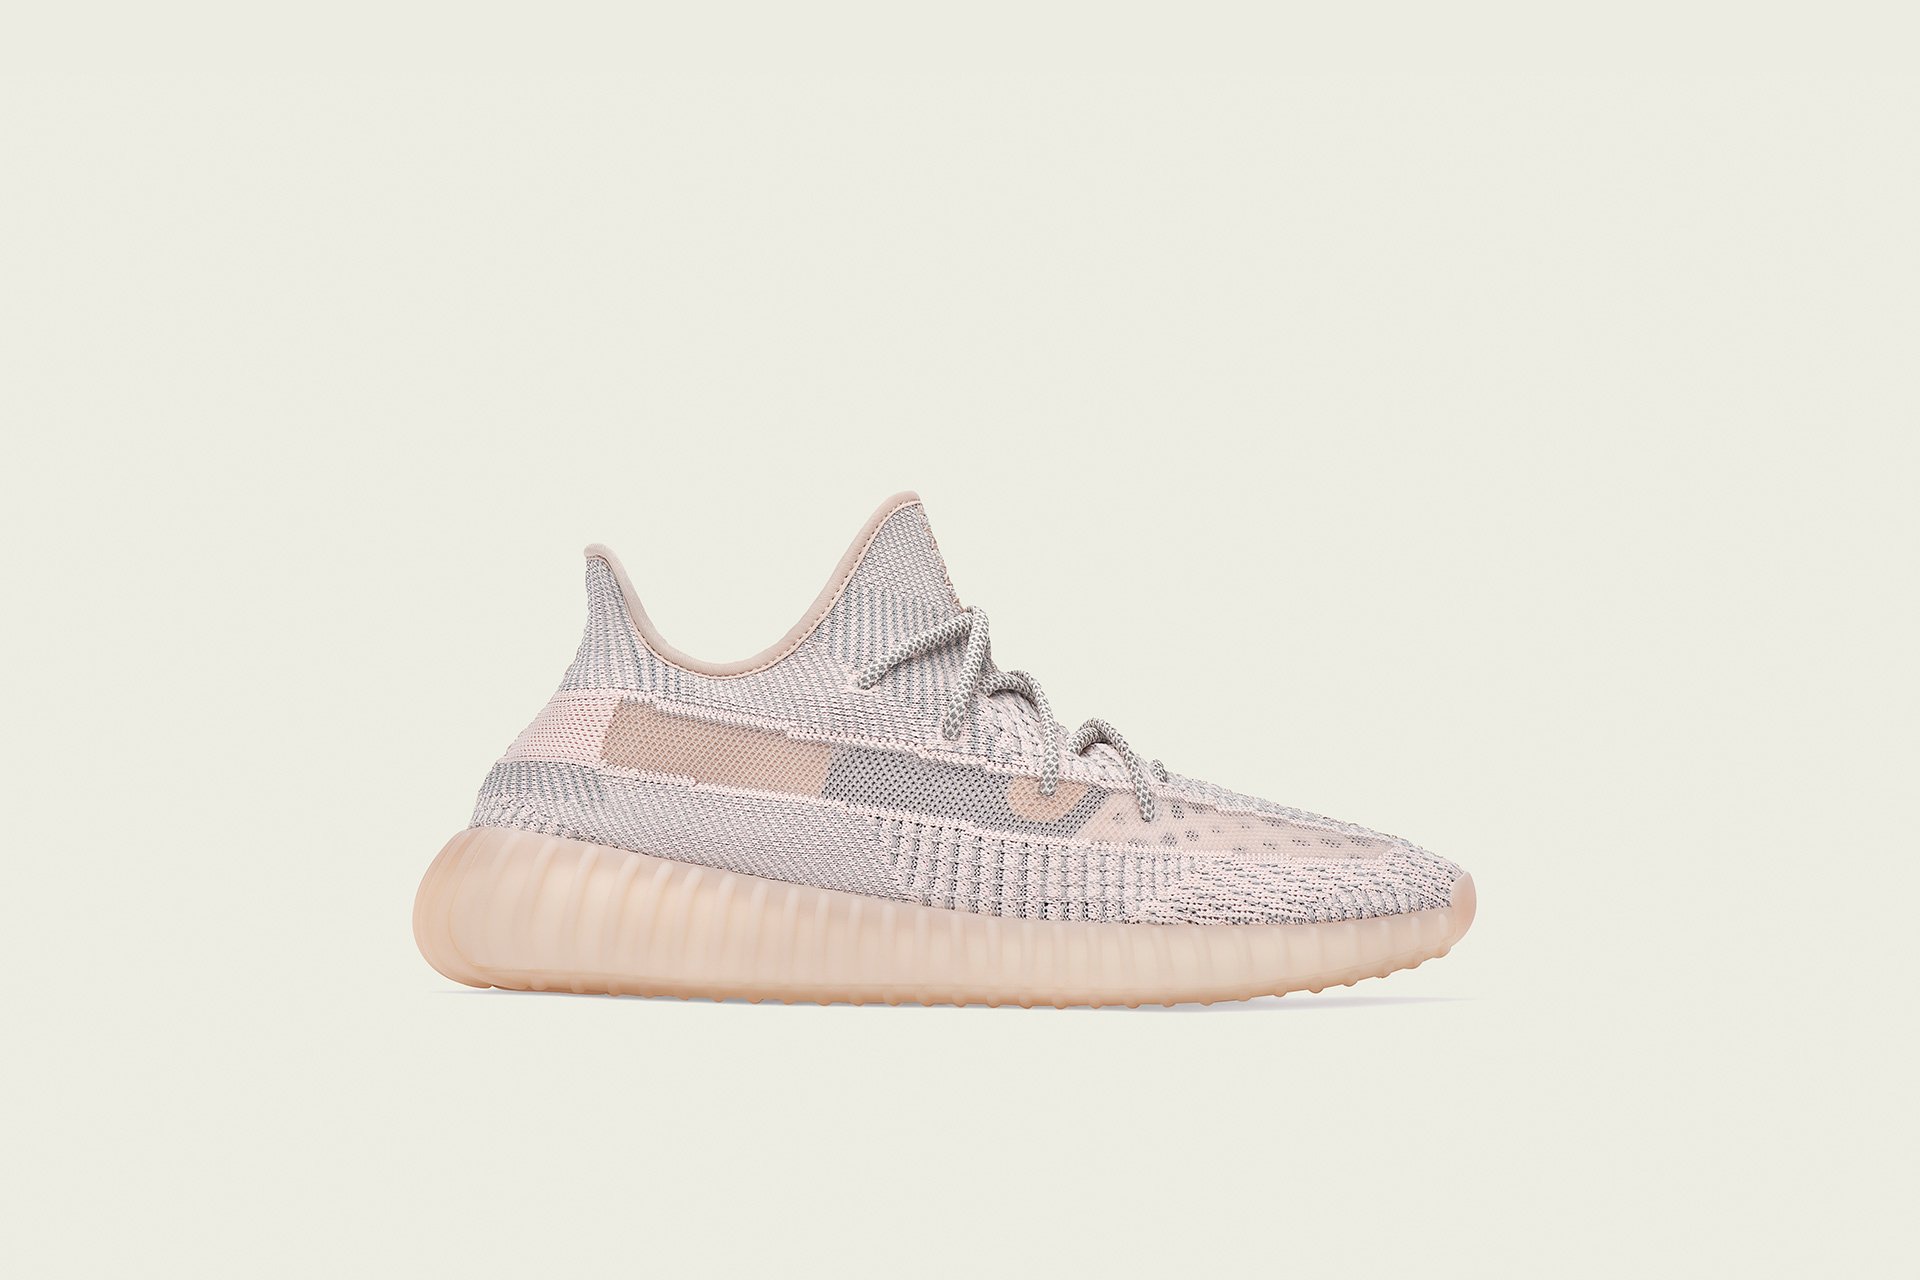 Yeezy Boost 350 V2 - FV5666 - Synth Ref - Footshop - Releases